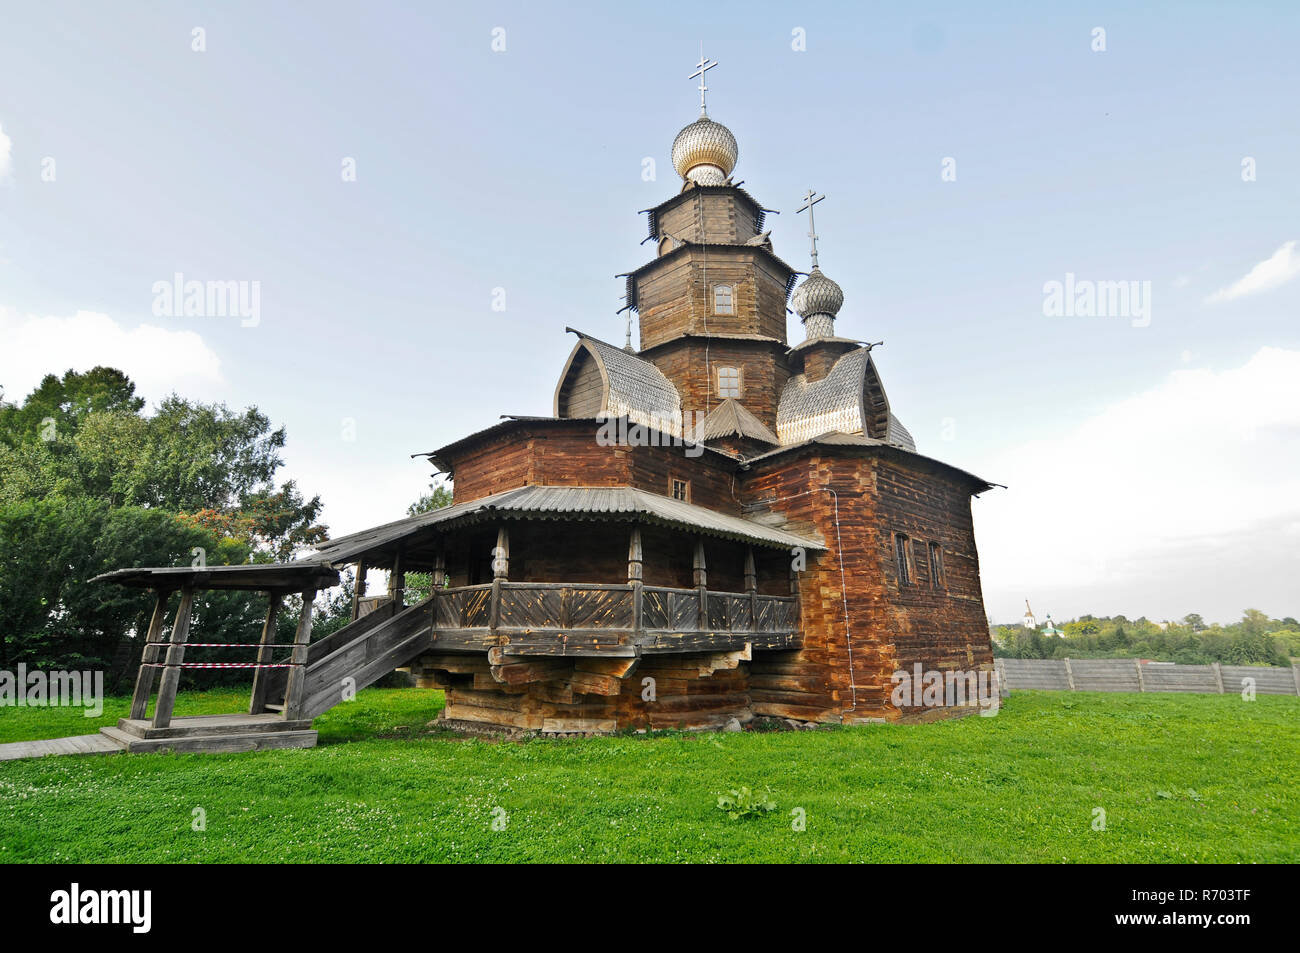 Museum of Wooden Architecture and Peasant Life - Ancient wooden church. Suzdal, Russia Stock Photo